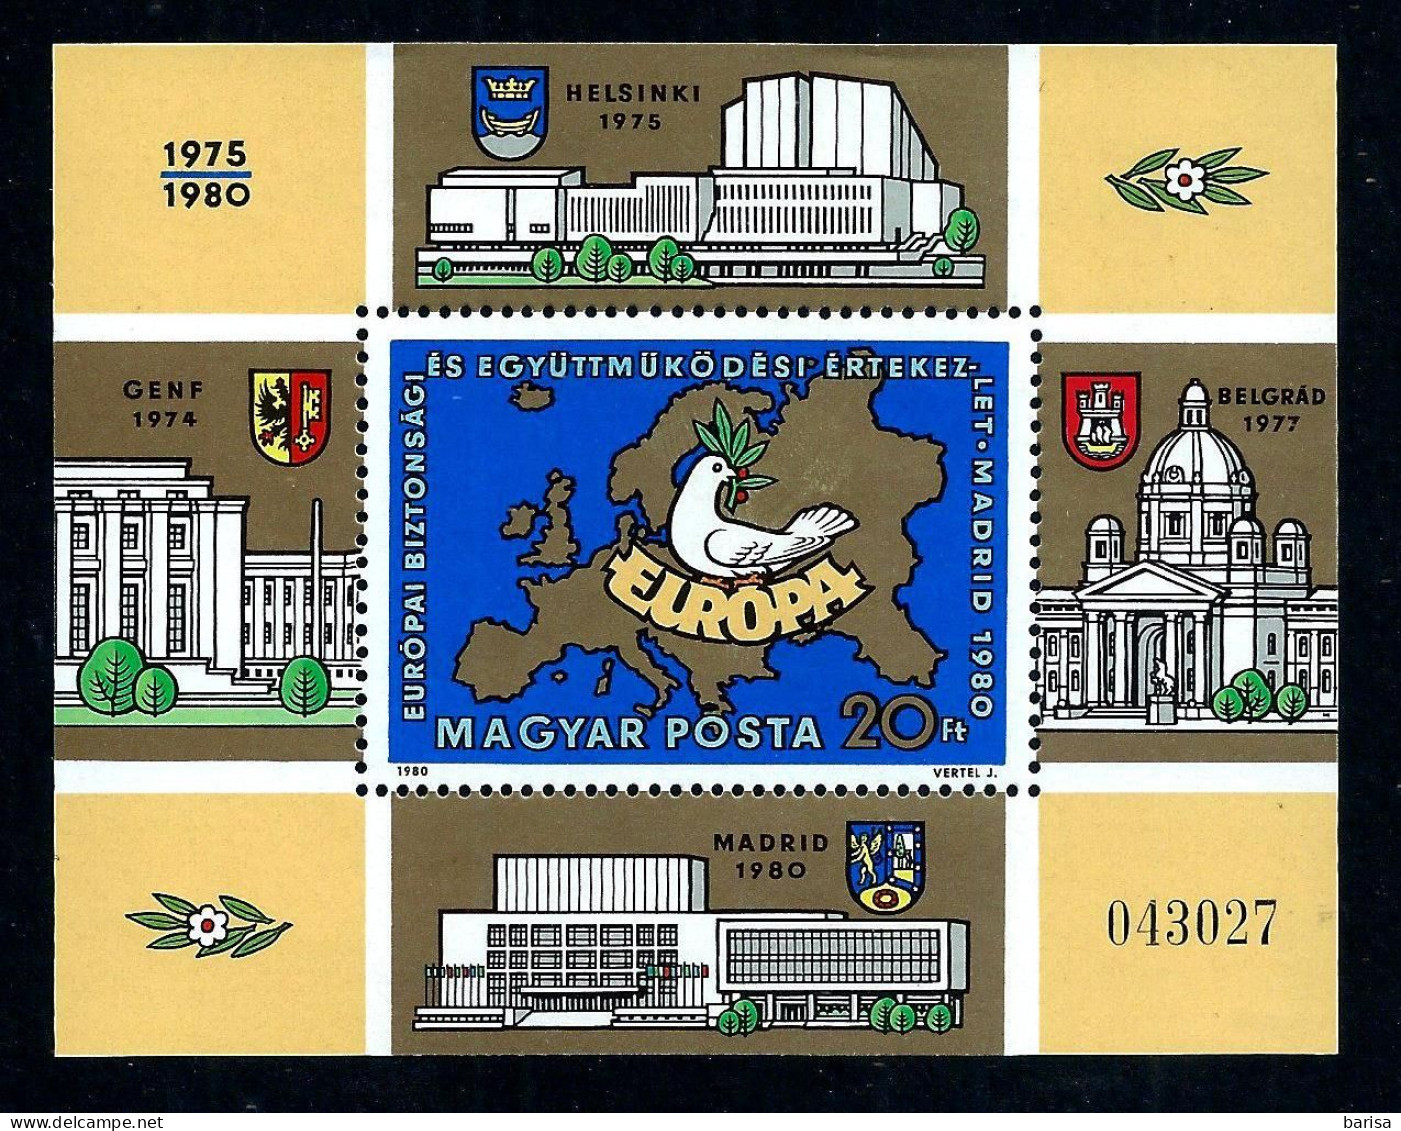 (A5) Hungary 1980: Conference On European Security And Cooperation (CSCE) - Madrid ** MNH - Europäischer Gedanke